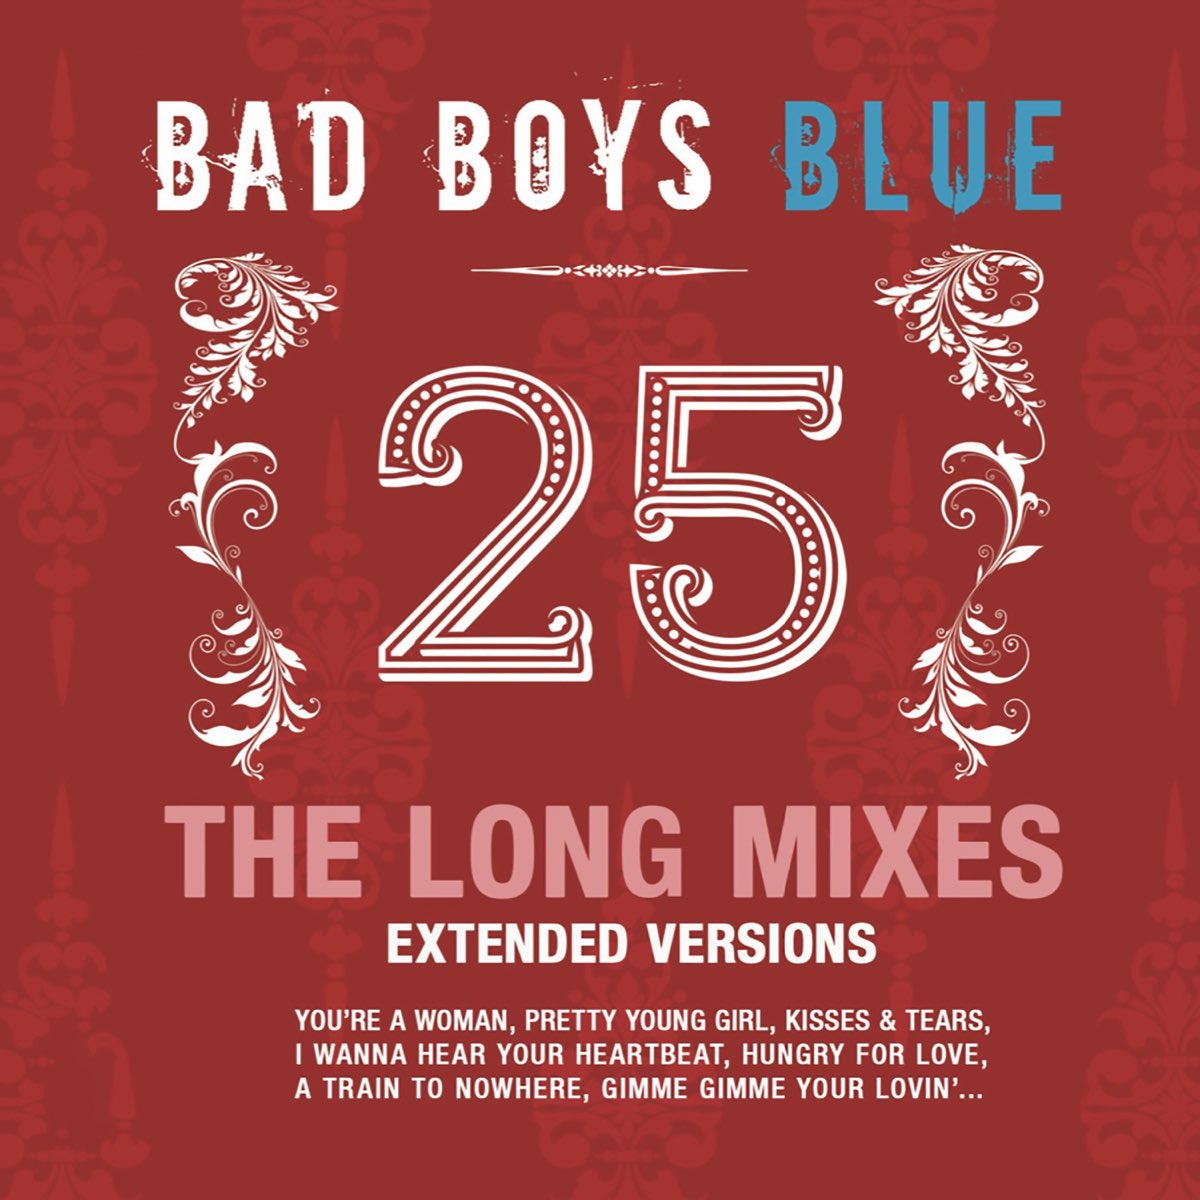 ‎25 (The Long Mixes) by Bad Boys Blue on Apple Music